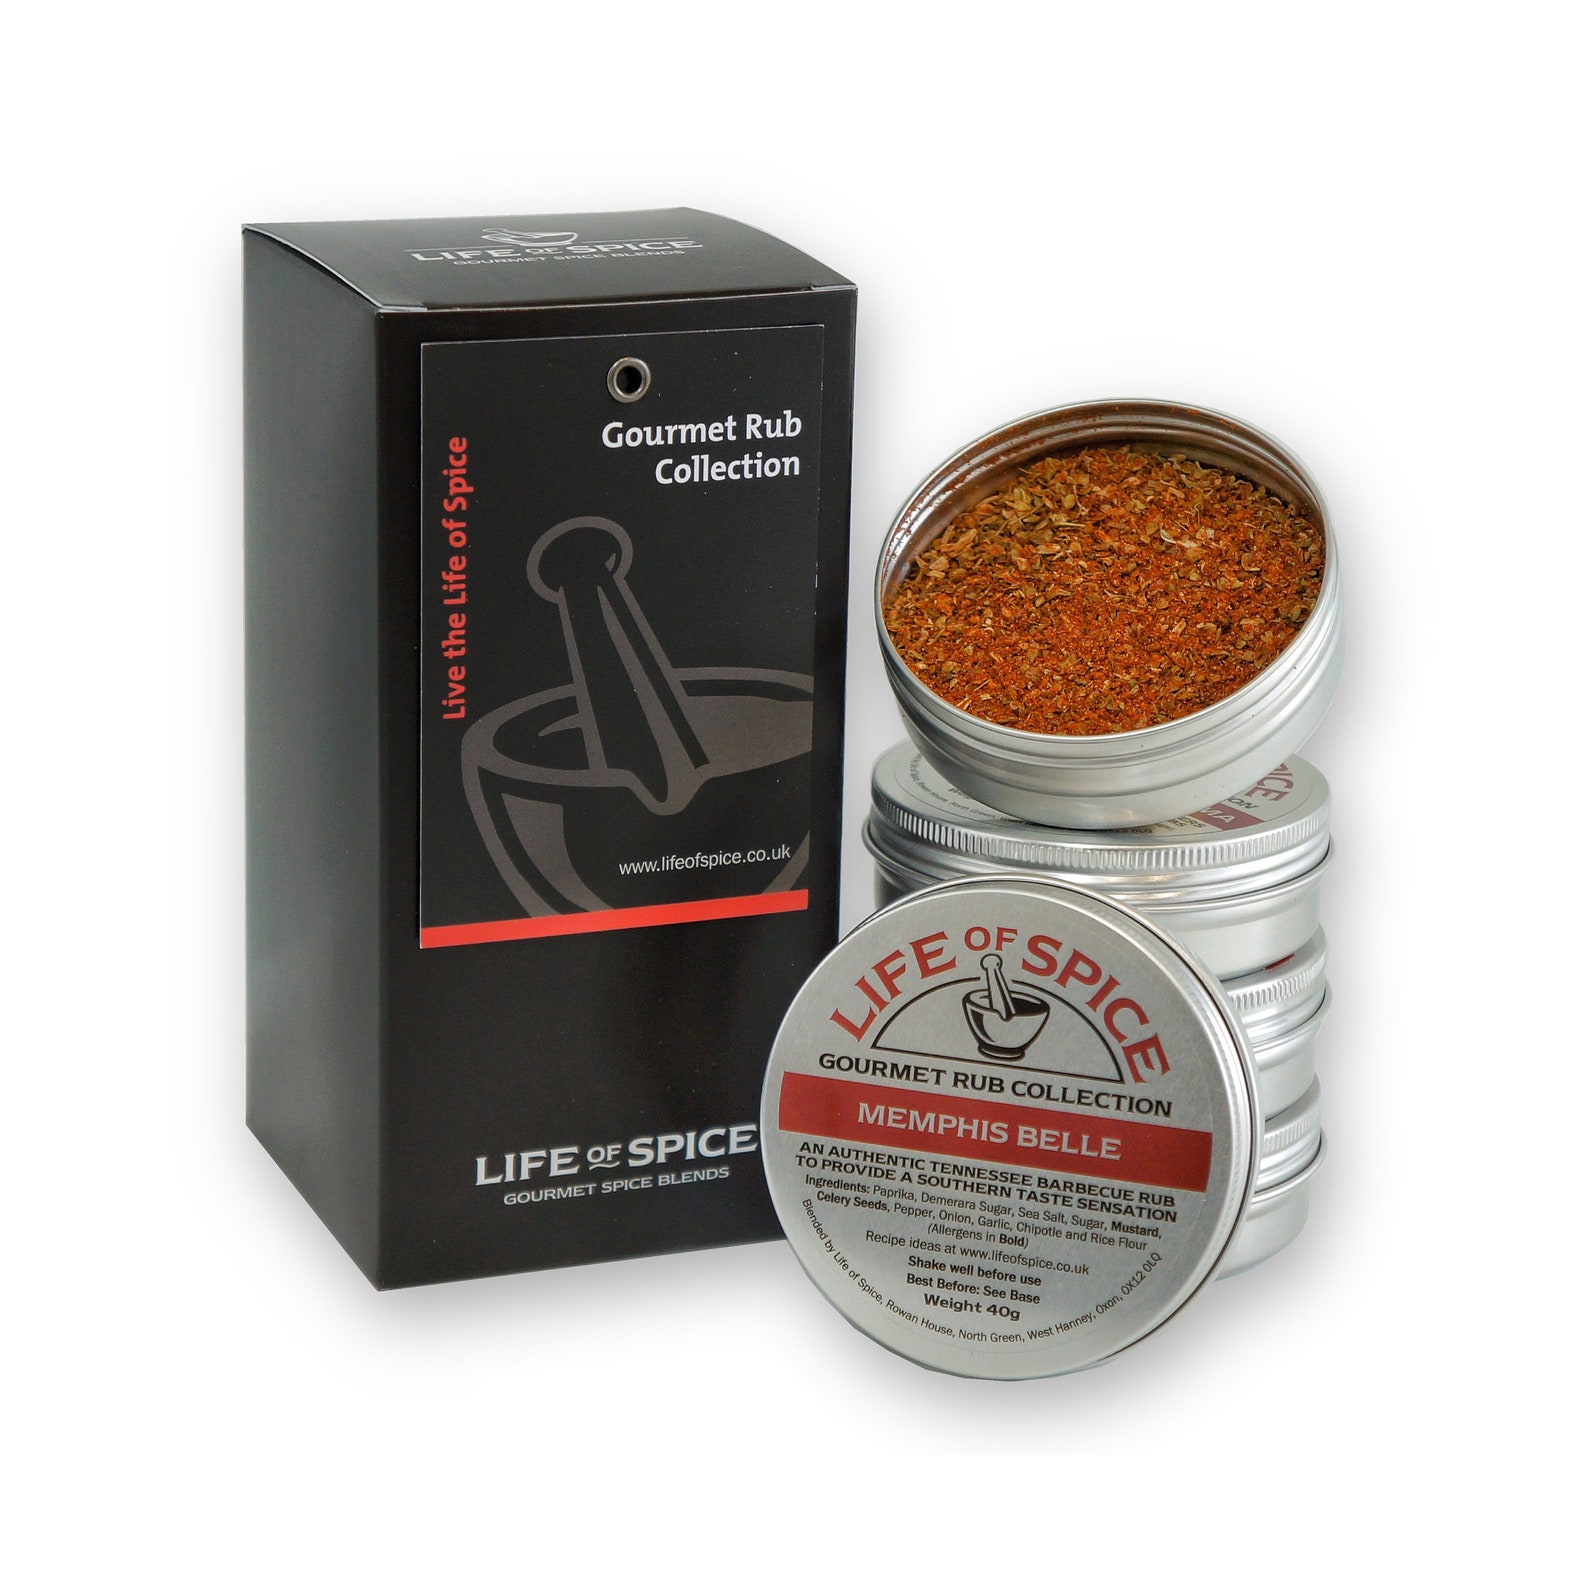 Set for life. The Gourmet collection специи. The Gourmet collection Spice Blends seasfood. Spicy Gift.